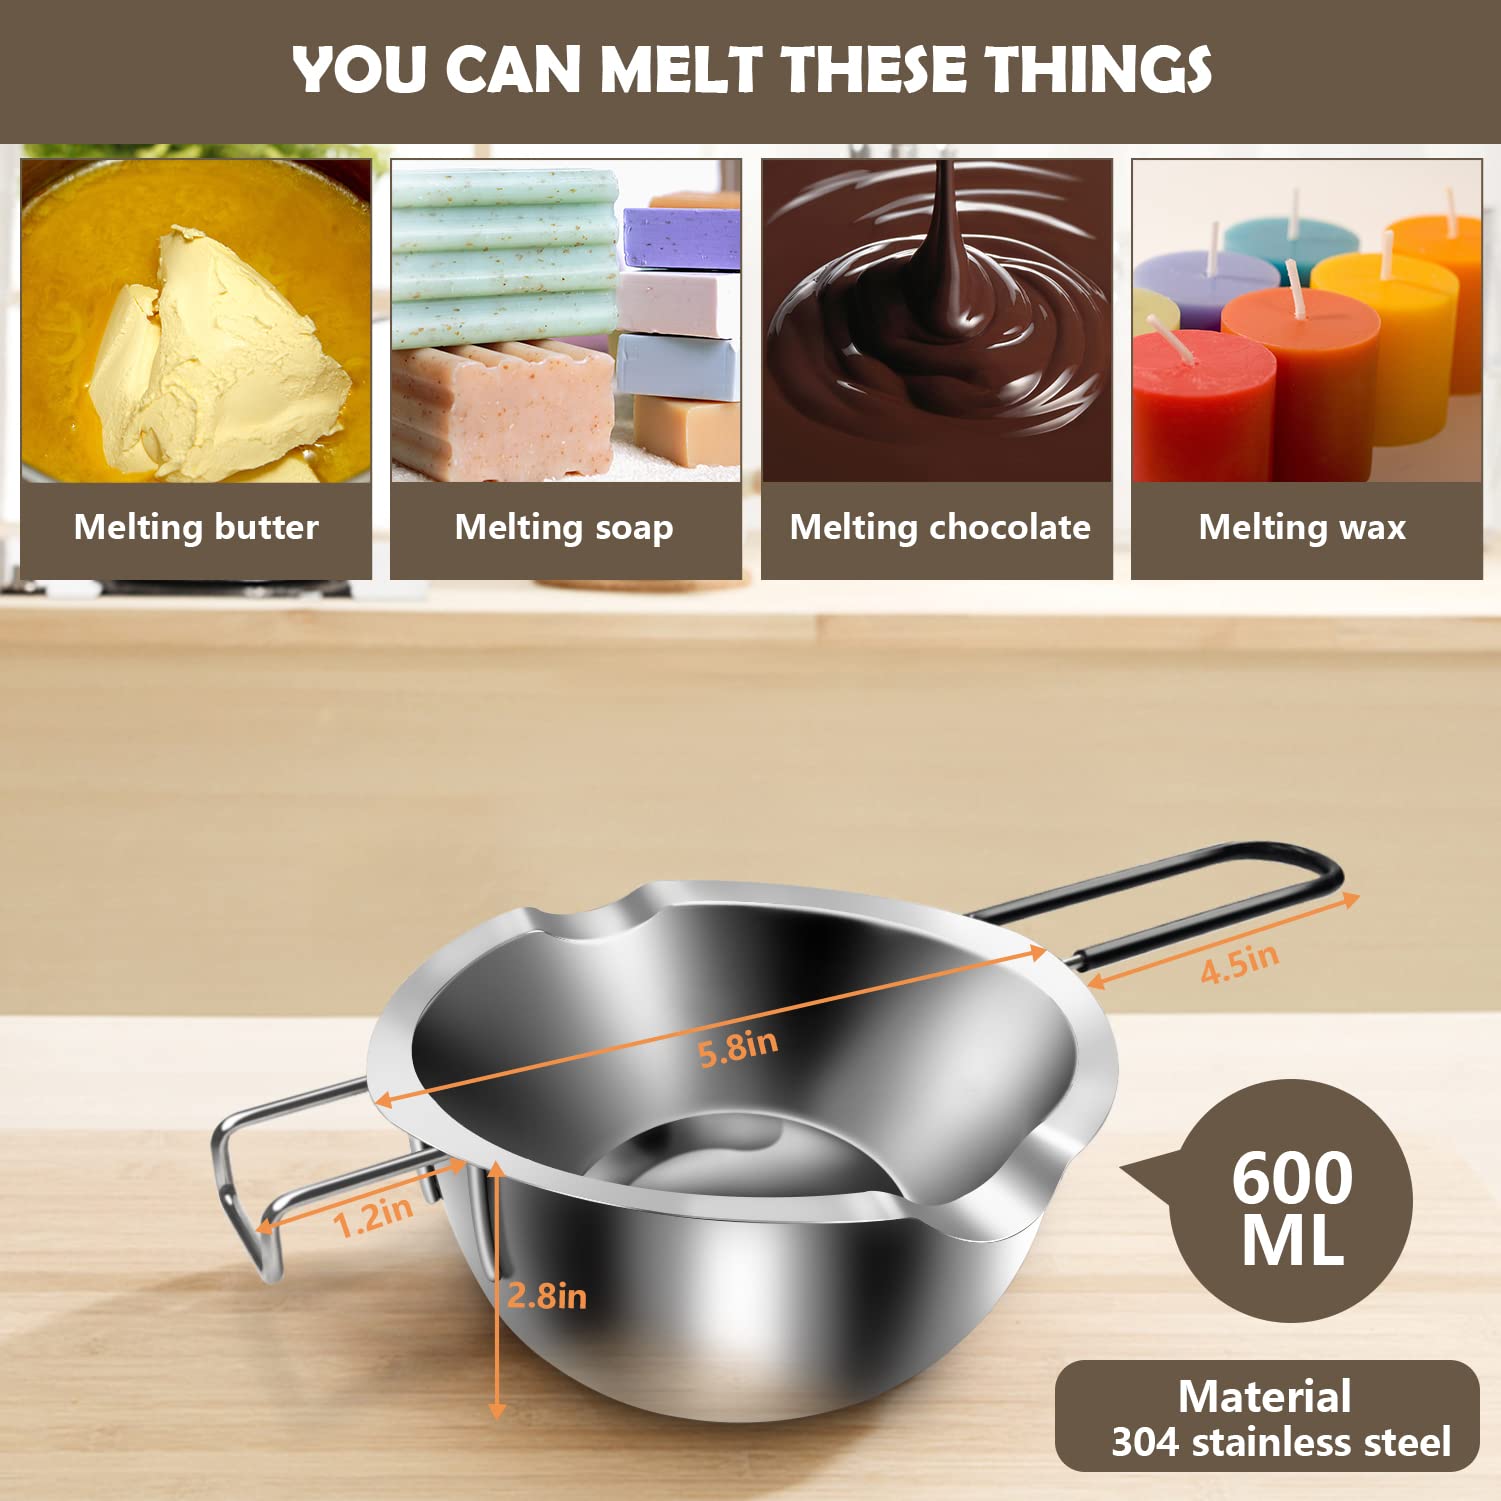 Artcome Double Boiler Melting Pot Set - 600ML/0.6QT Chocolate Melting Pot, 1600ML/1.7QT Stainless Steel Pot, Decorating Spoons, Silicone Spatula and Dipping Tool for Melting Chocolate, Candy, Soap